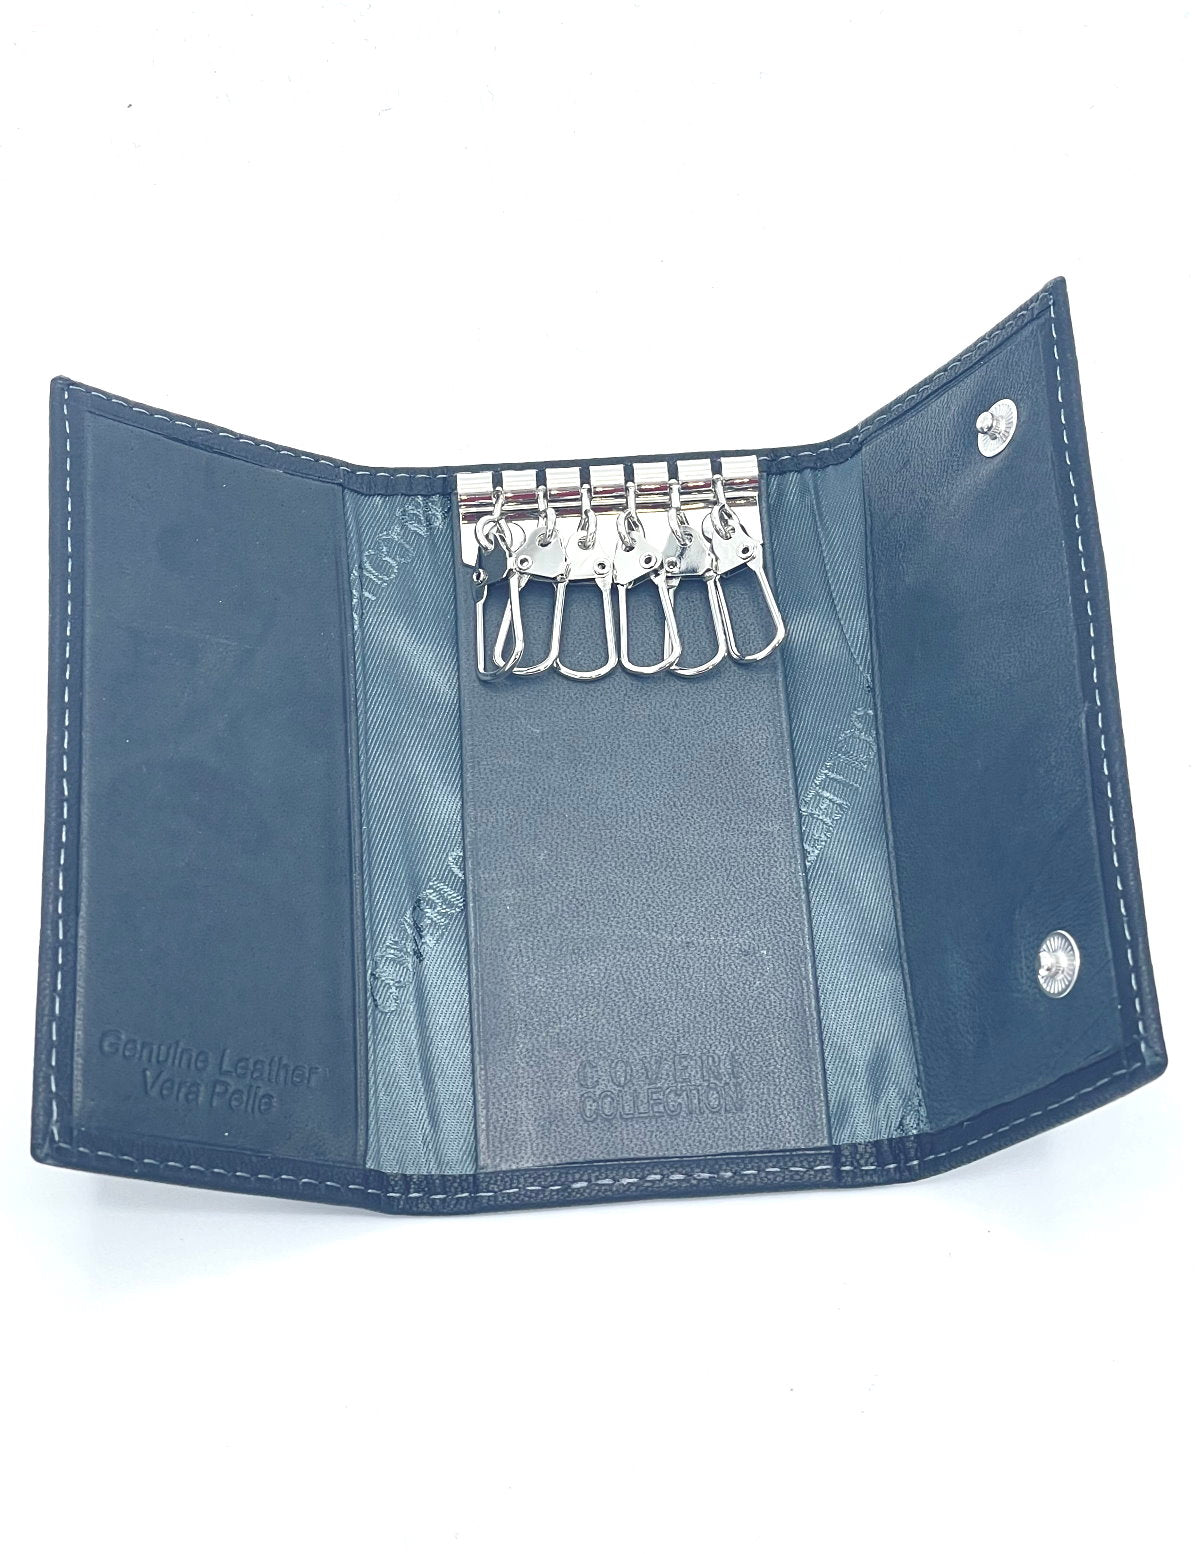 Genuine leather key holder, Brand Coveri Collection, art. 515005.335